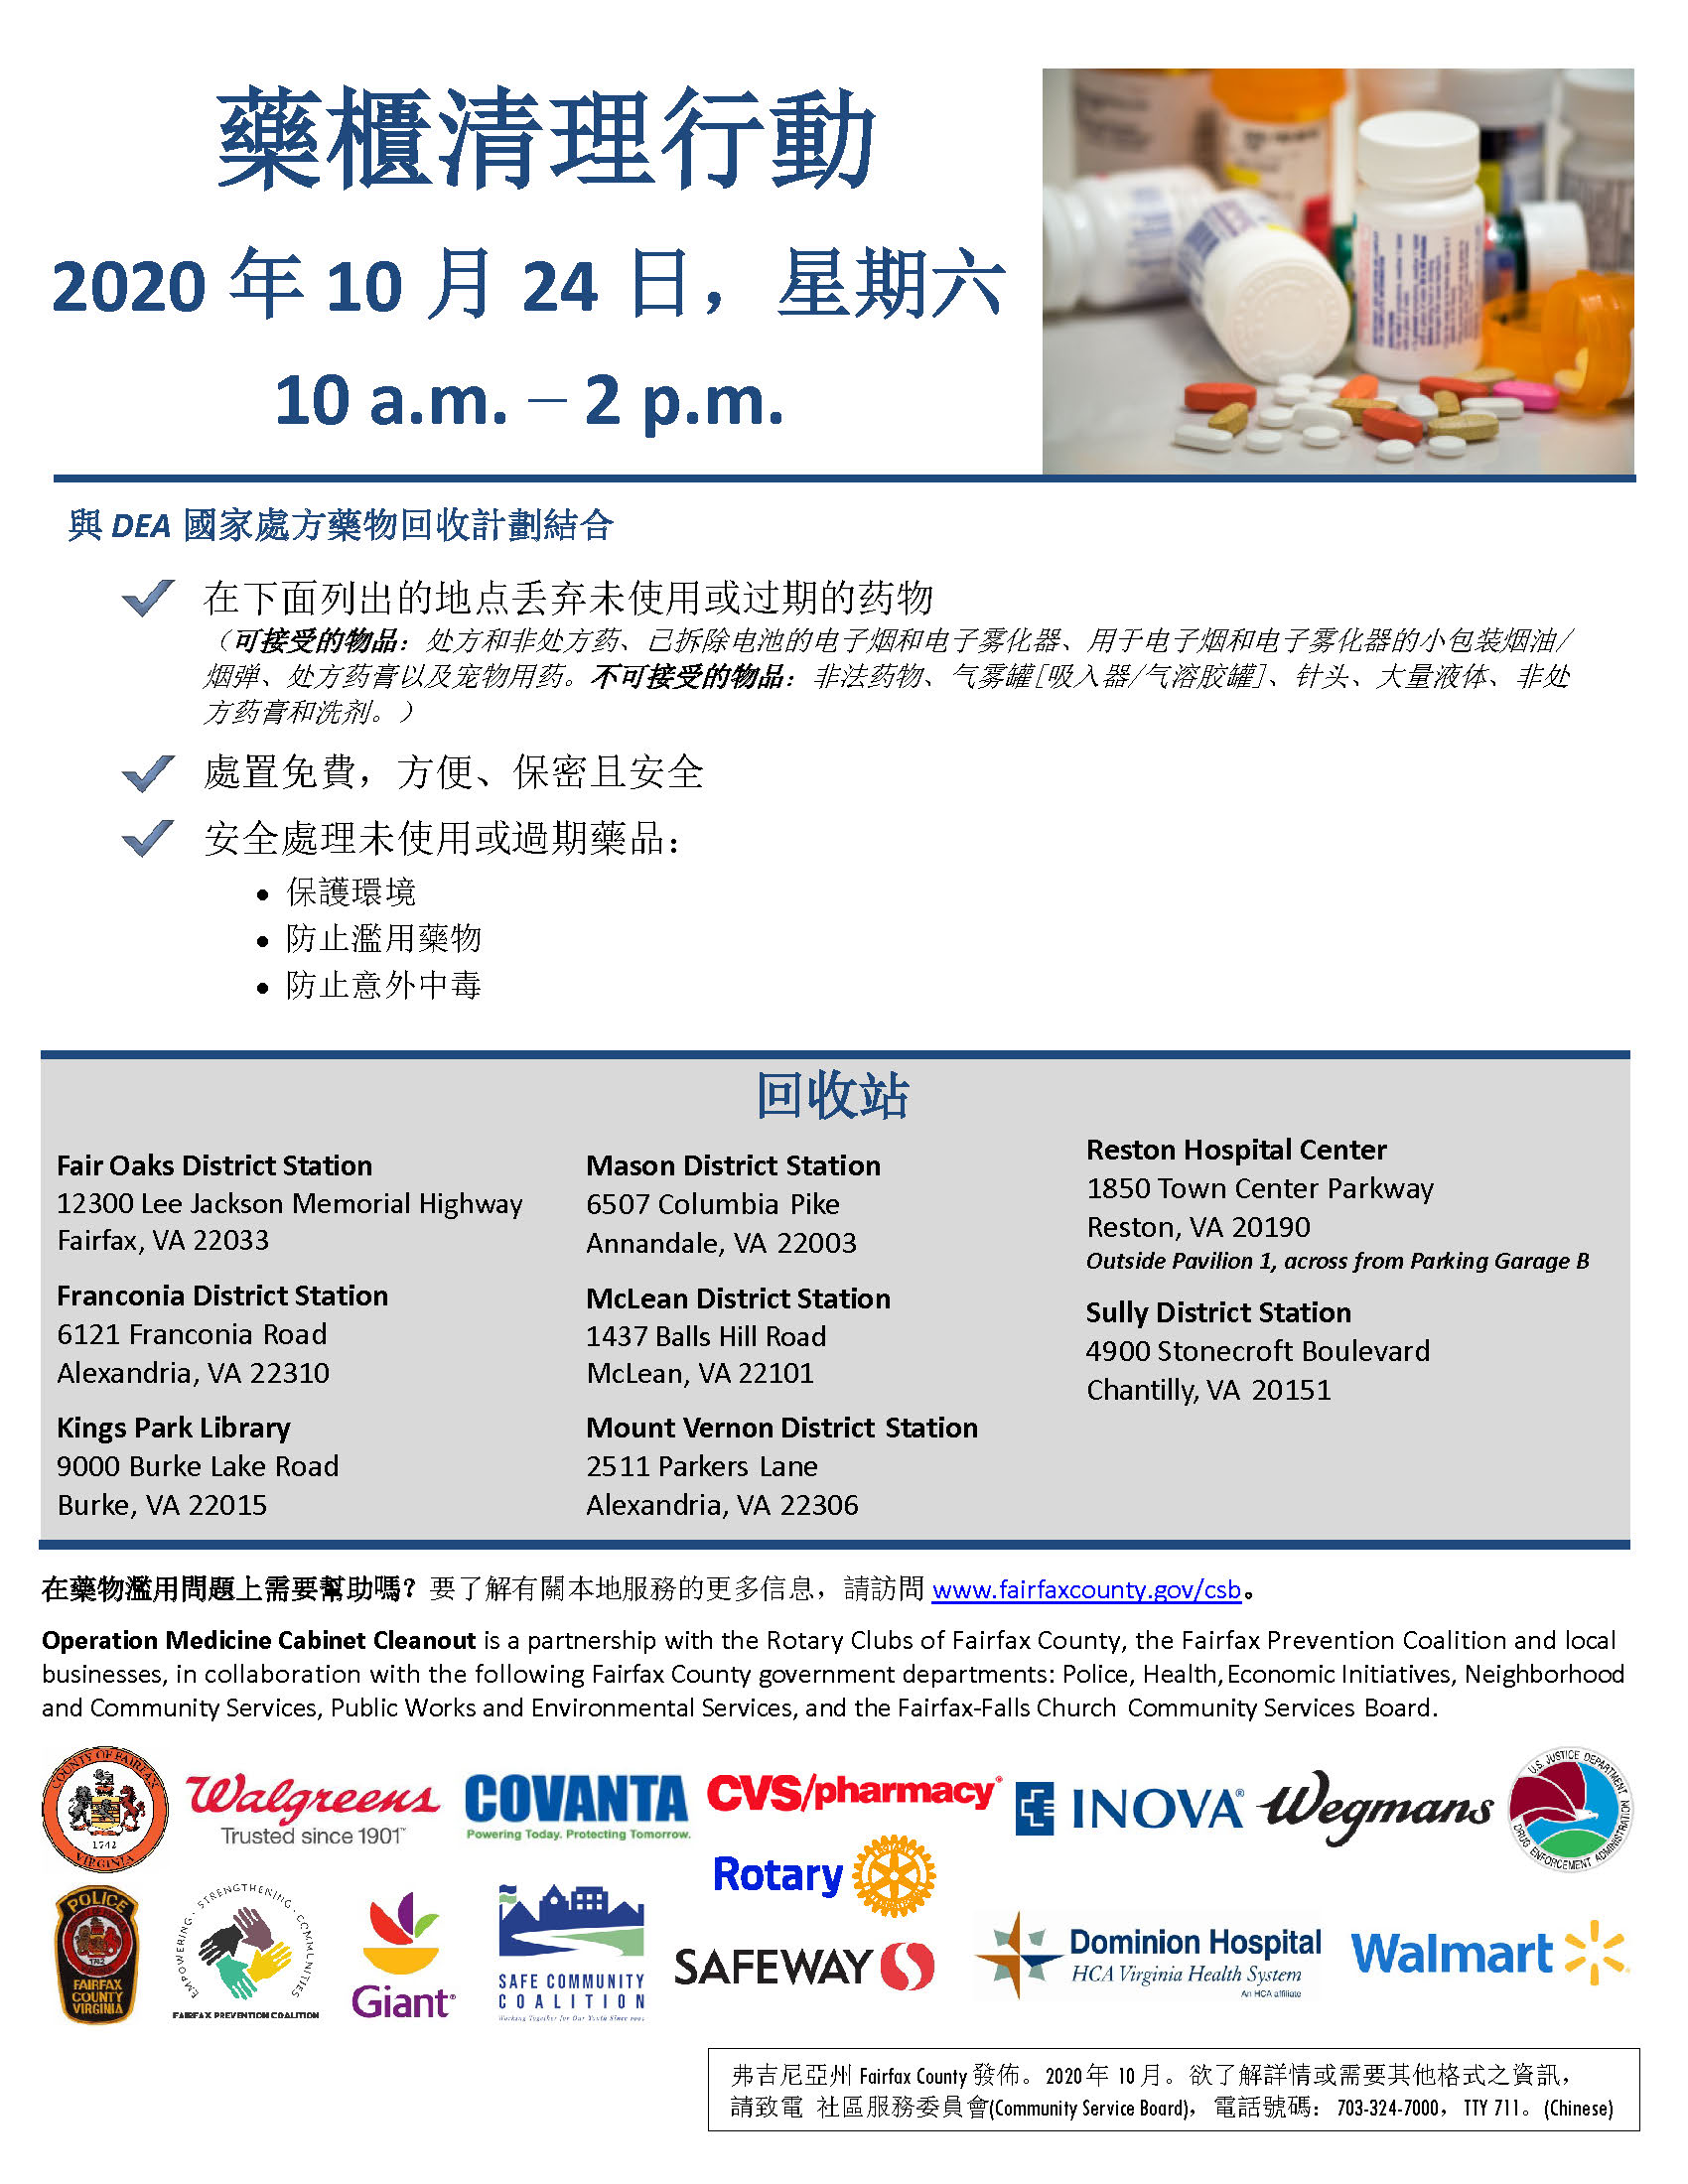 Operation Medicine Cabinet Cleanout flyer - Chinese